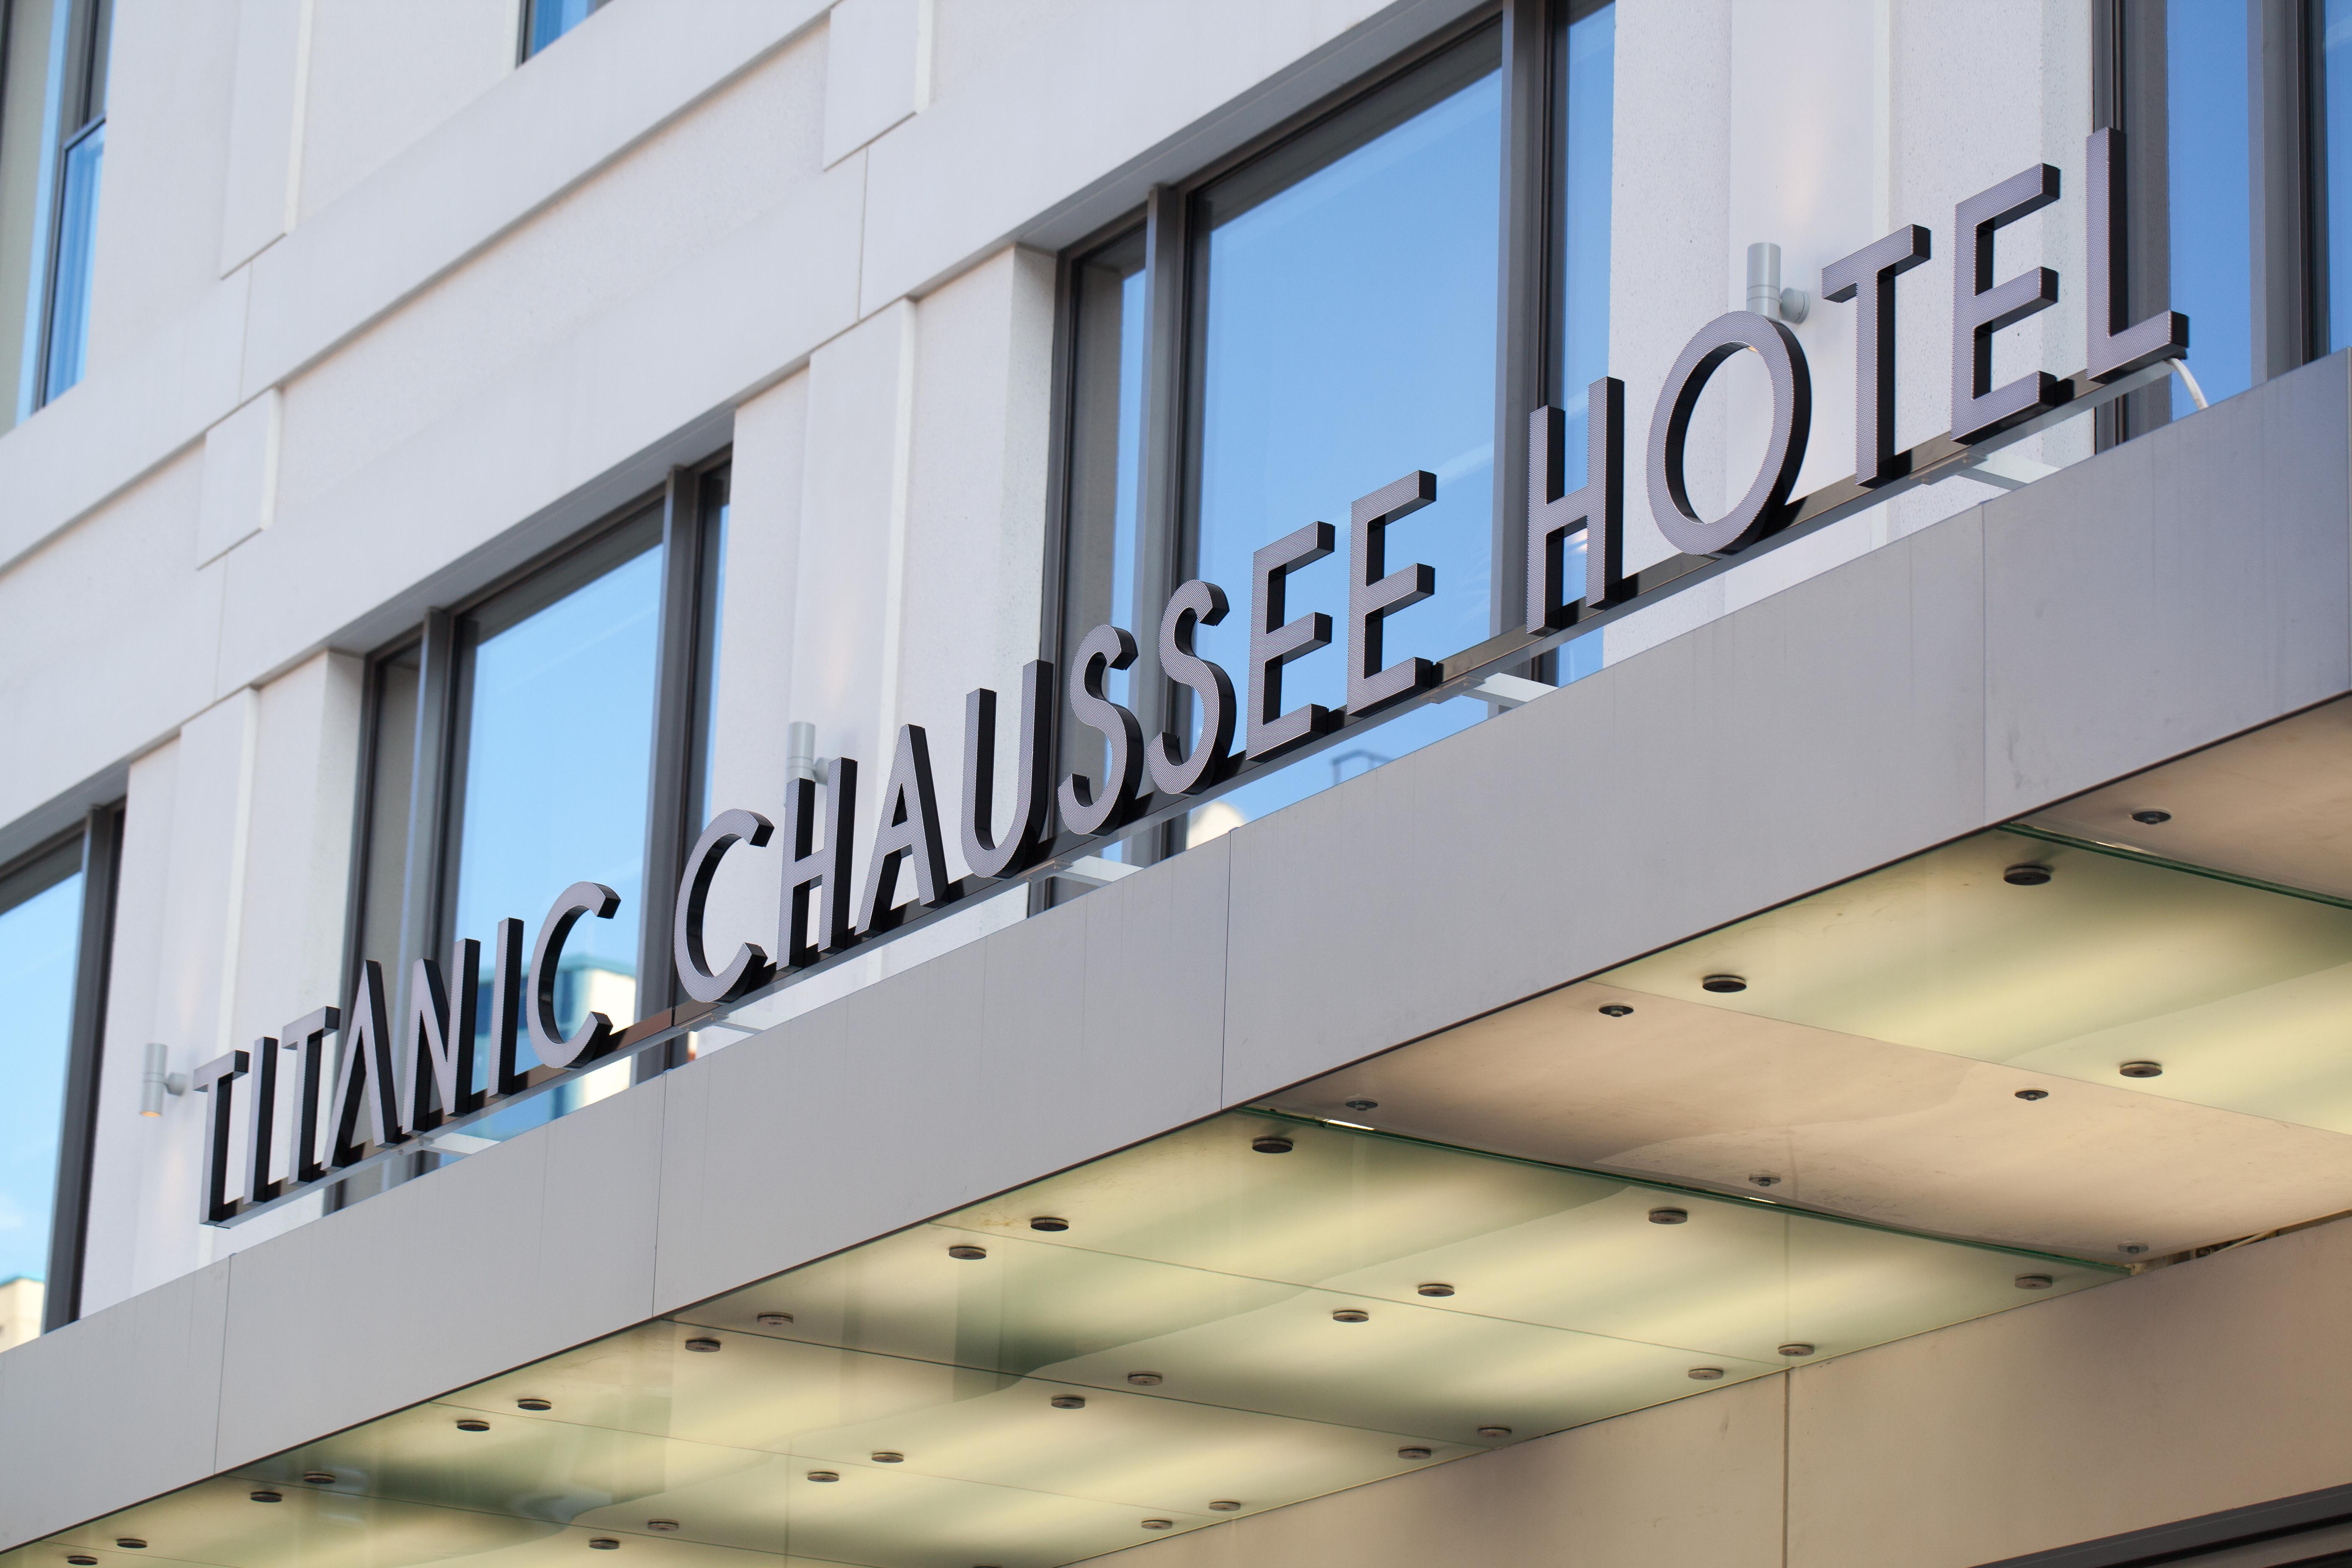 HOTEL TITANIC CHAUSSEE BERLIN 4* (Germany) - from US$ 121 | BOOKED